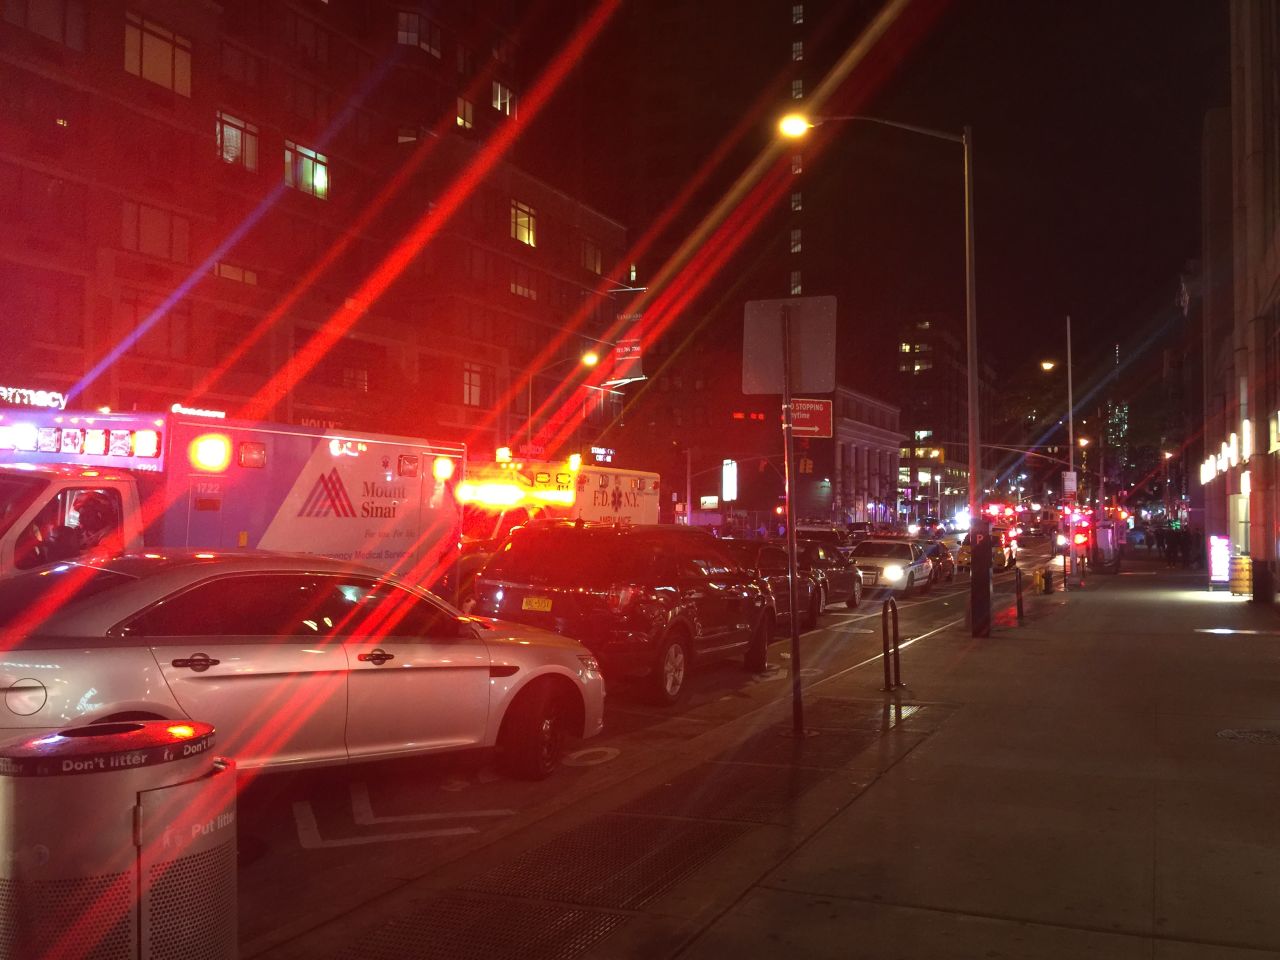 A line of emergency vehicles near the scene of the explosion. 